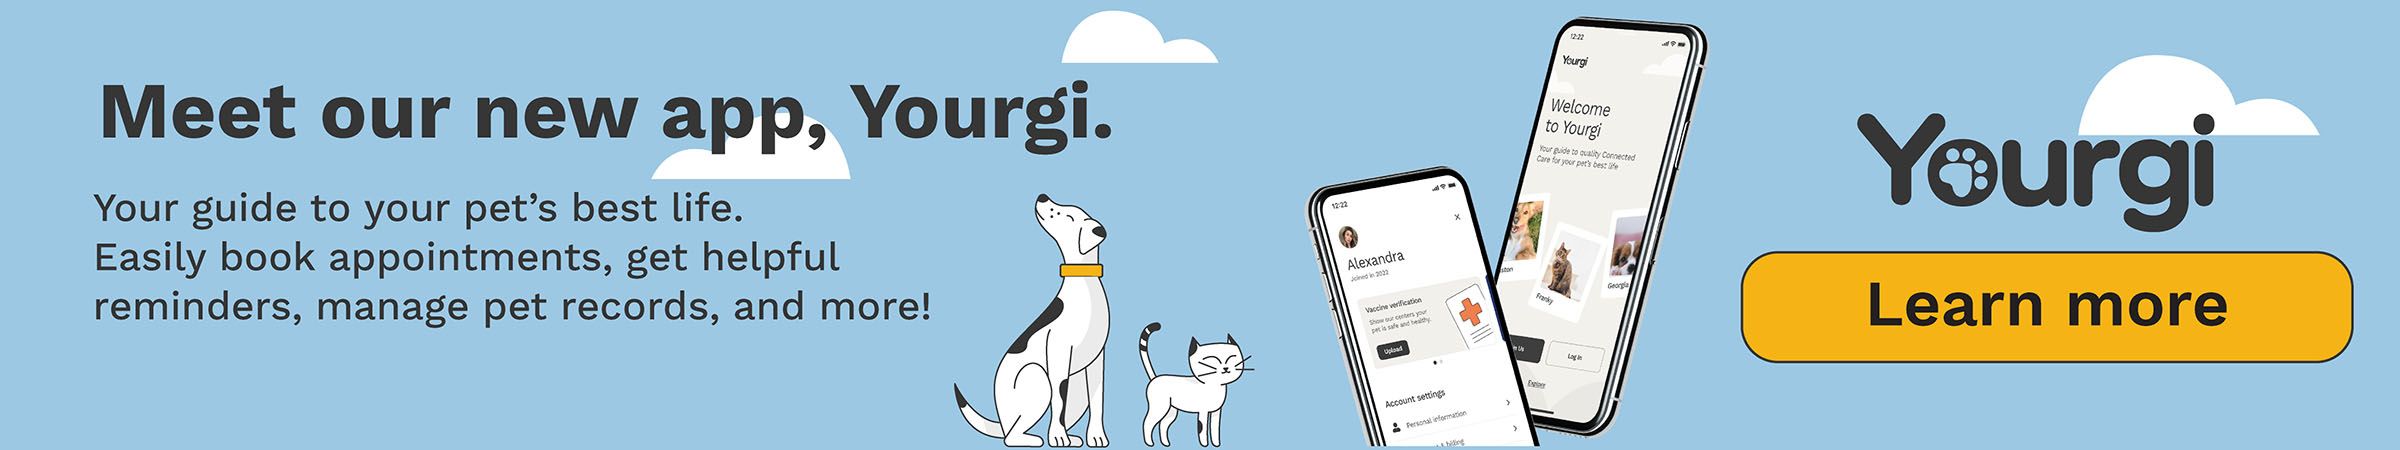 Meet our new app, Yourgi!